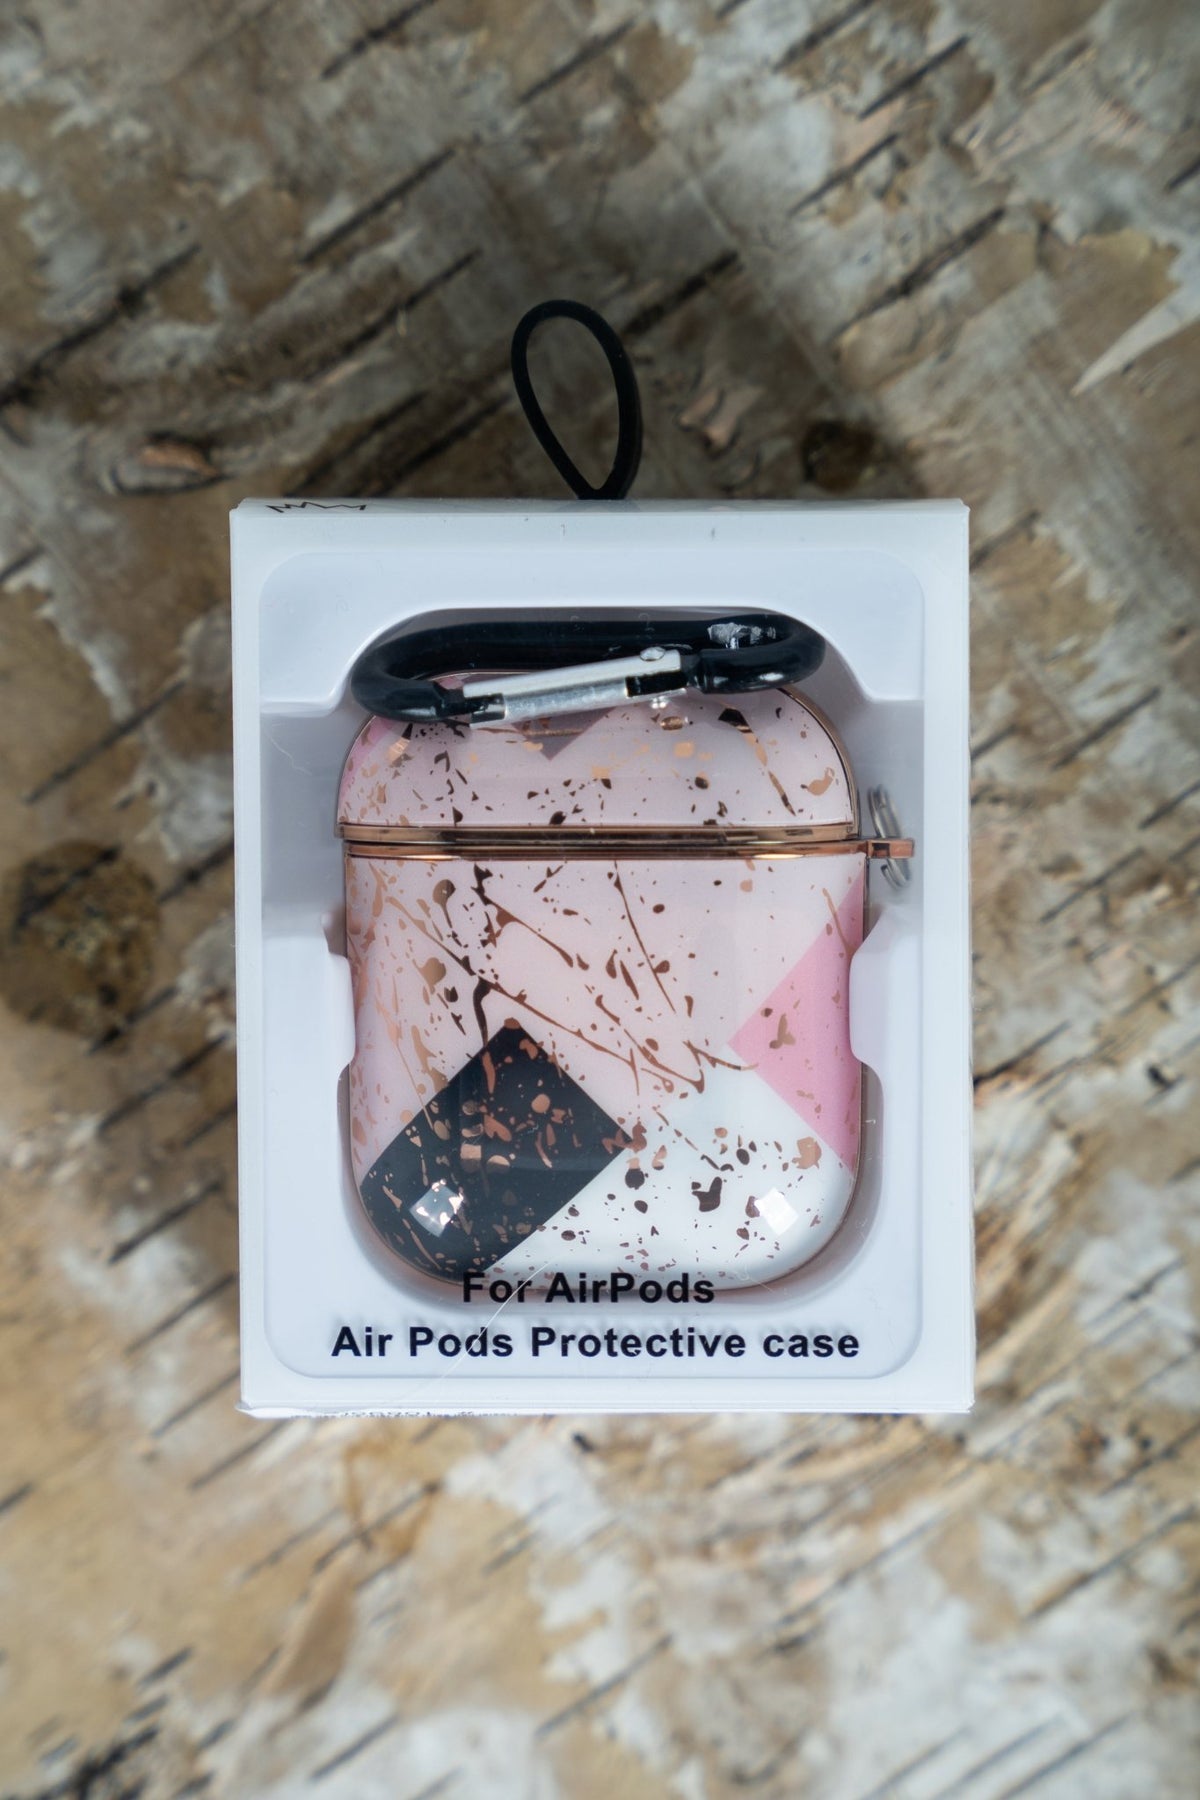 Geometric metallic marble airpods case pink/black white - Trendy Phone Accessories and Stylish Watch Bands at Lush Fashion Lounge Boutique in Oklahoma City